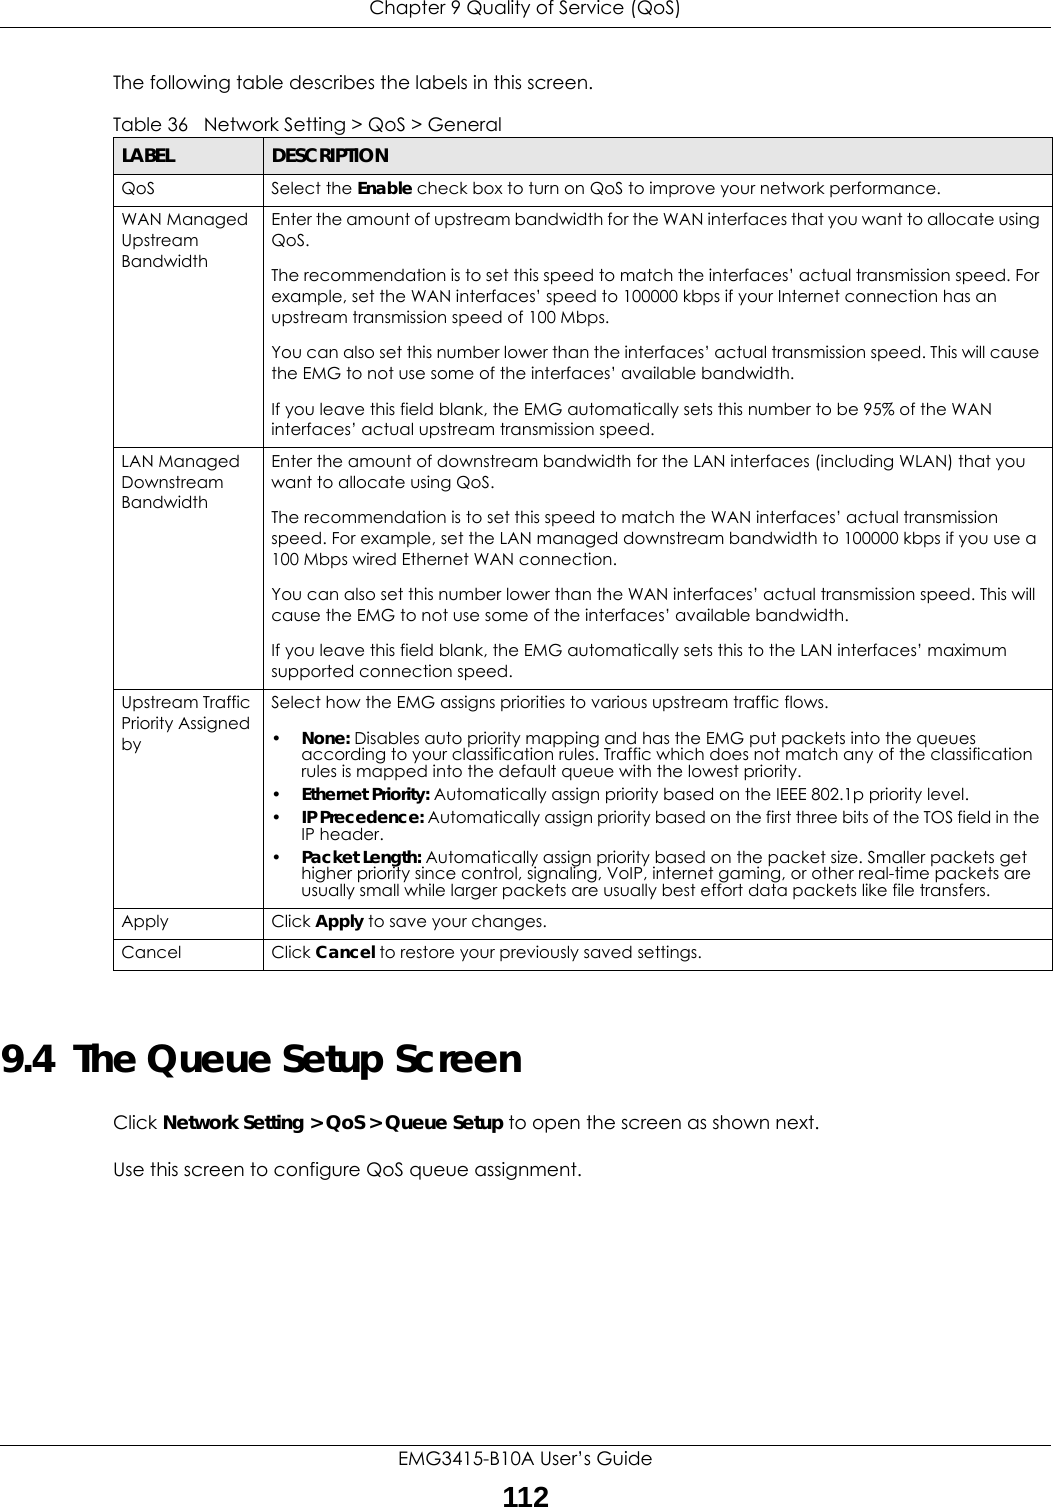 Chapter 9 Quality of Service (QoS)EMG3415-B10A User’s Guide112The following table describes the labels in this screen. 9.4  The Queue Setup ScreenClick Network Setting &gt; QoS &gt; Queue Setup to open the screen as shown next. Use this screen to configure QoS queue assignment. Table 36   Network Setting &gt; QoS &gt; GeneralLABEL DESCRIPTIONQoS Select the Enable check box to turn on QoS to improve your network performance. WAN Managed Upstream Bandwidth Enter the amount of upstream bandwidth for the WAN interfaces that you want to allocate using QoS. The recommendation is to set this speed to match the interfaces’ actual transmission speed. For example, set the WAN interfaces’ speed to 100000 kbps if your Internet connection has an upstream transmission speed of 100 Mbps.        You can also set this number lower than the interfaces’ actual transmission speed. This will cause the EMG to not use some of the interfaces’ available bandwidth.If you leave this field blank, the EMG automatically sets this number to be 95% of the WAN interfaces’ actual upstream transmission speed.LAN Managed Downstream Bandwidth Enter the amount of downstream bandwidth for the LAN interfaces (including WLAN) that you want to allocate using QoS. The recommendation is to set this speed to match the WAN interfaces’ actual transmission speed. For example, set the LAN managed downstream bandwidth to 100000 kbps if you use a 100 Mbps wired Ethernet WAN connection.        You can also set this number lower than the WAN interfaces’ actual transmission speed. This will cause the EMG to not use some of the interfaces’ available bandwidth.If you leave this field blank, the EMG automatically sets this to the LAN interfaces’ maximum supported connection speed.Upstream Traffic Priority Assigned bySelect how the EMG assigns priorities to various upstream traffic flows.•None: Disables auto priority mapping and has the EMG put packets into the queues according to your classification rules. Traffic which does not match any of the classification rules is mapped into the default queue with the lowest priority.•Ethernet Priority: Automatically assign priority based on the IEEE 802.1p priority level.•IP Precedence: Automatically assign priority based on the first three bits of the TOS field in the IP header.•Packet Length: Automatically assign priority based on the packet size. Smaller packets get higher priority since control, signaling, VoIP, internet gaming, or other real-time packets are usually small while larger packets are usually best effort data packets like file transfers.Apply Click Apply to save your changes.Cancel Click Cancel to restore your previously saved settings.